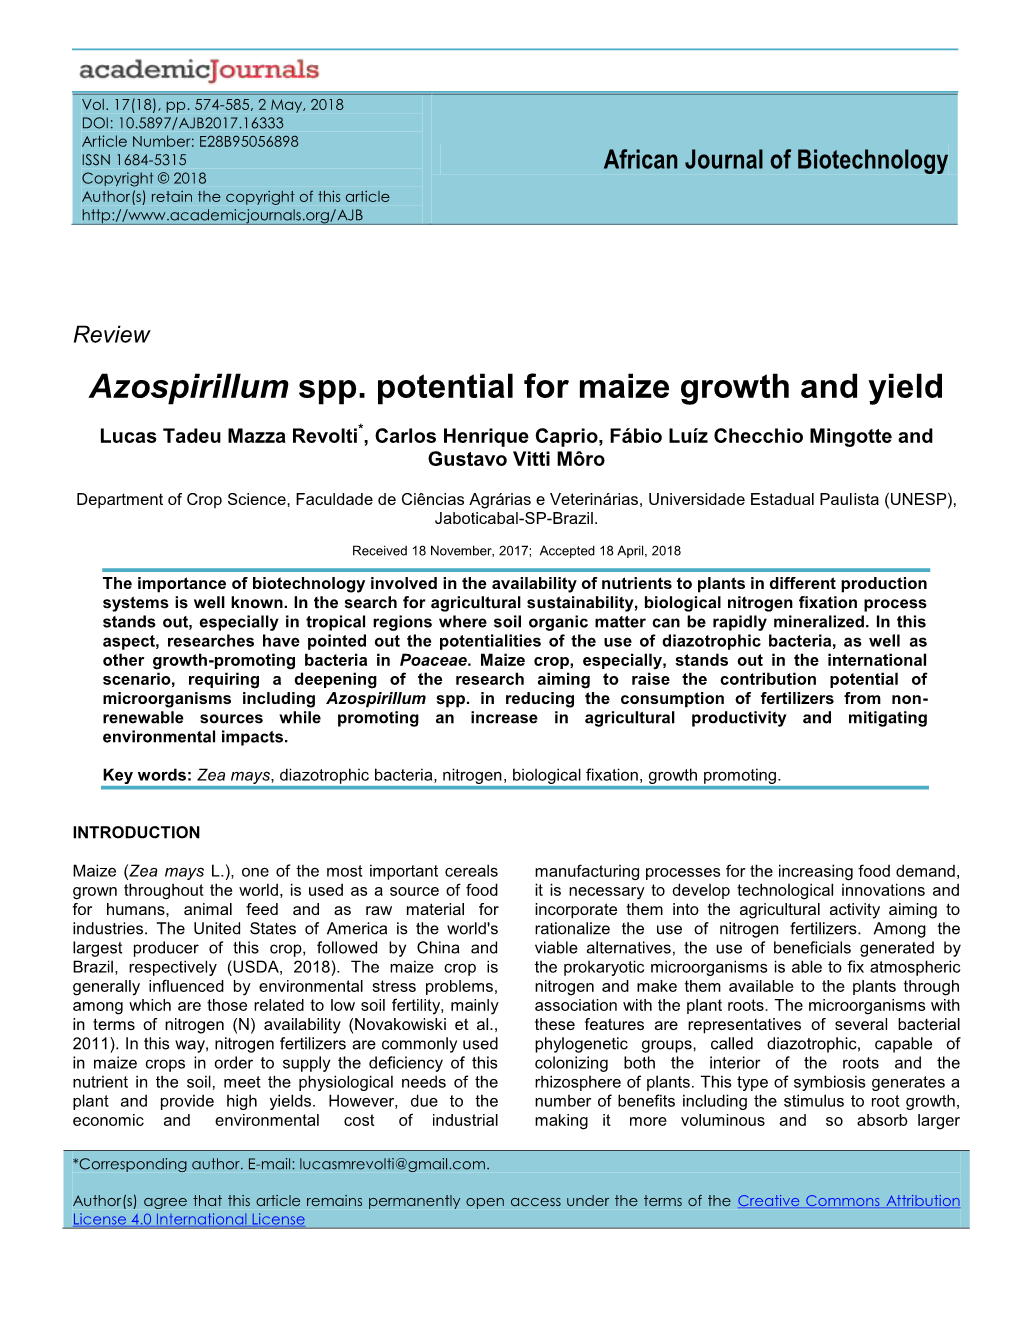 Azospirillum Spp. Potential for Maize Growth and Yield